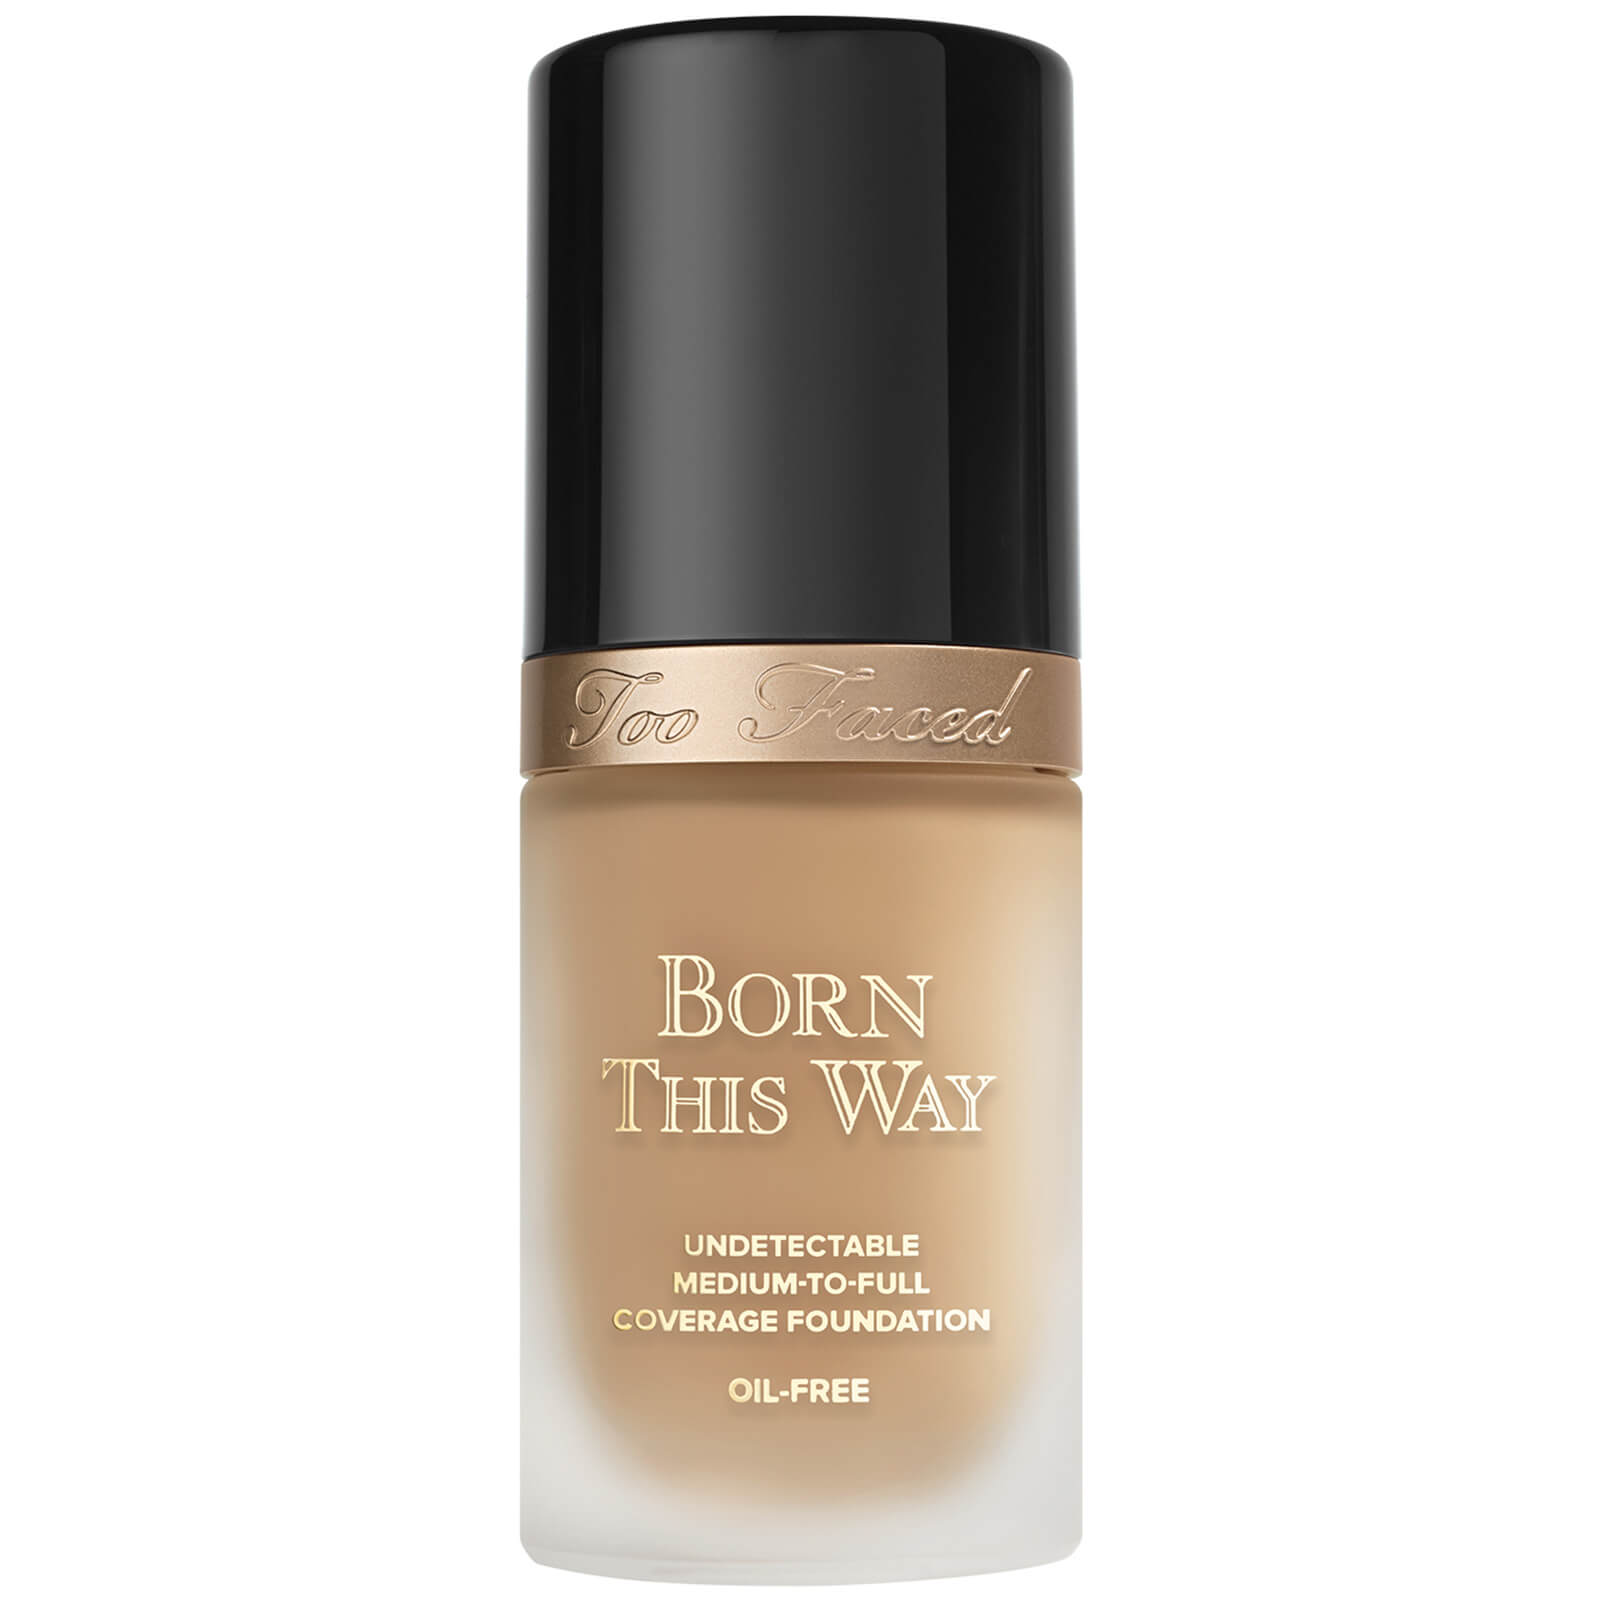 Too Faced Born This Way Foundation 30ml (Various Shades) - Warm Beige